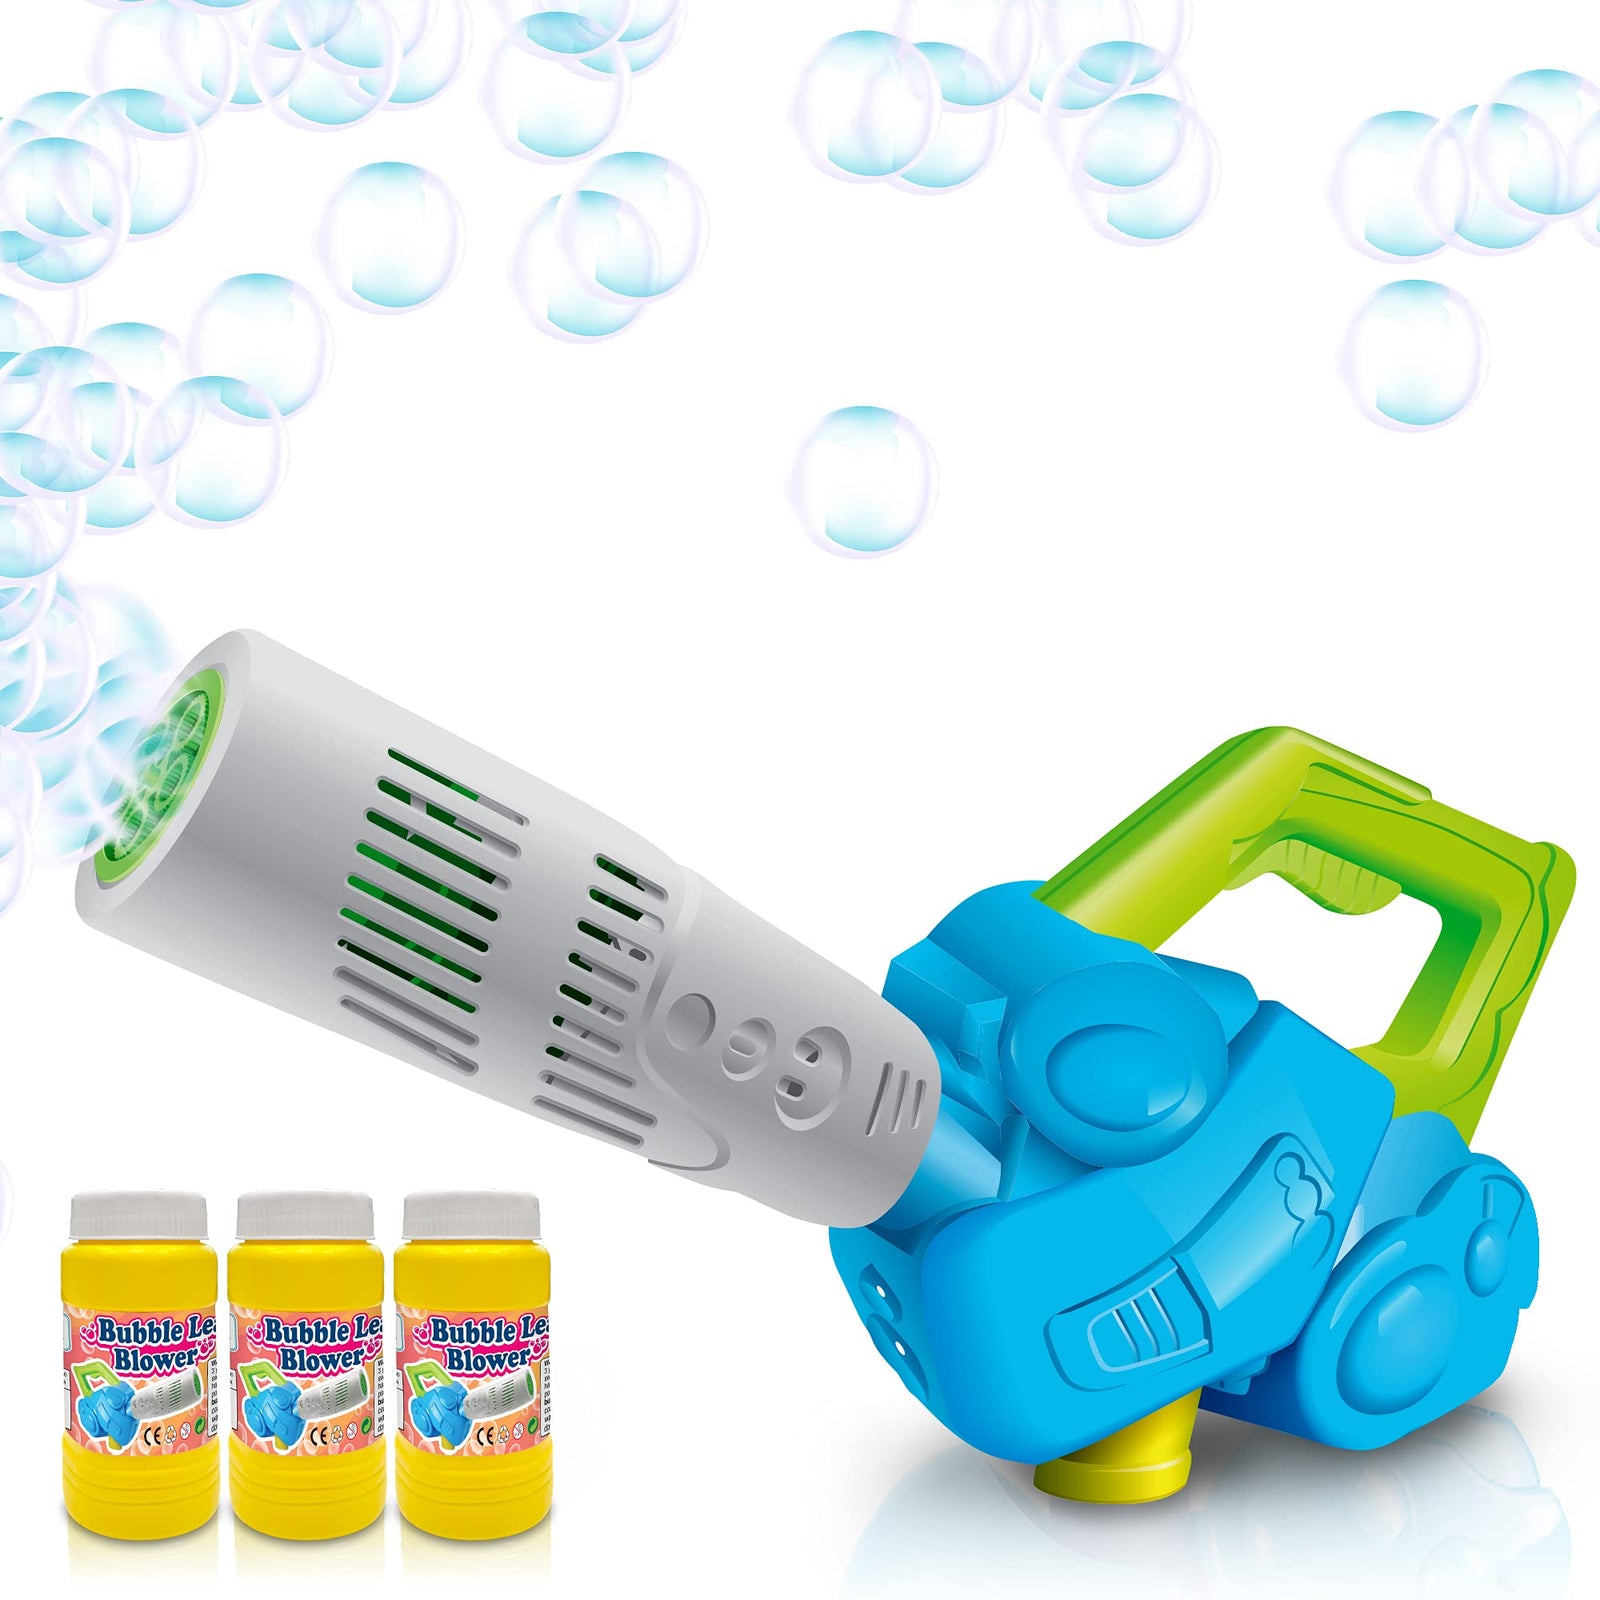 ArtCreativity Bubble Leaf Blower, Bubble Solution Included, Fun Bubbles Blowing Toys for Boys and Girls, Cool Birthday Gift for Kids